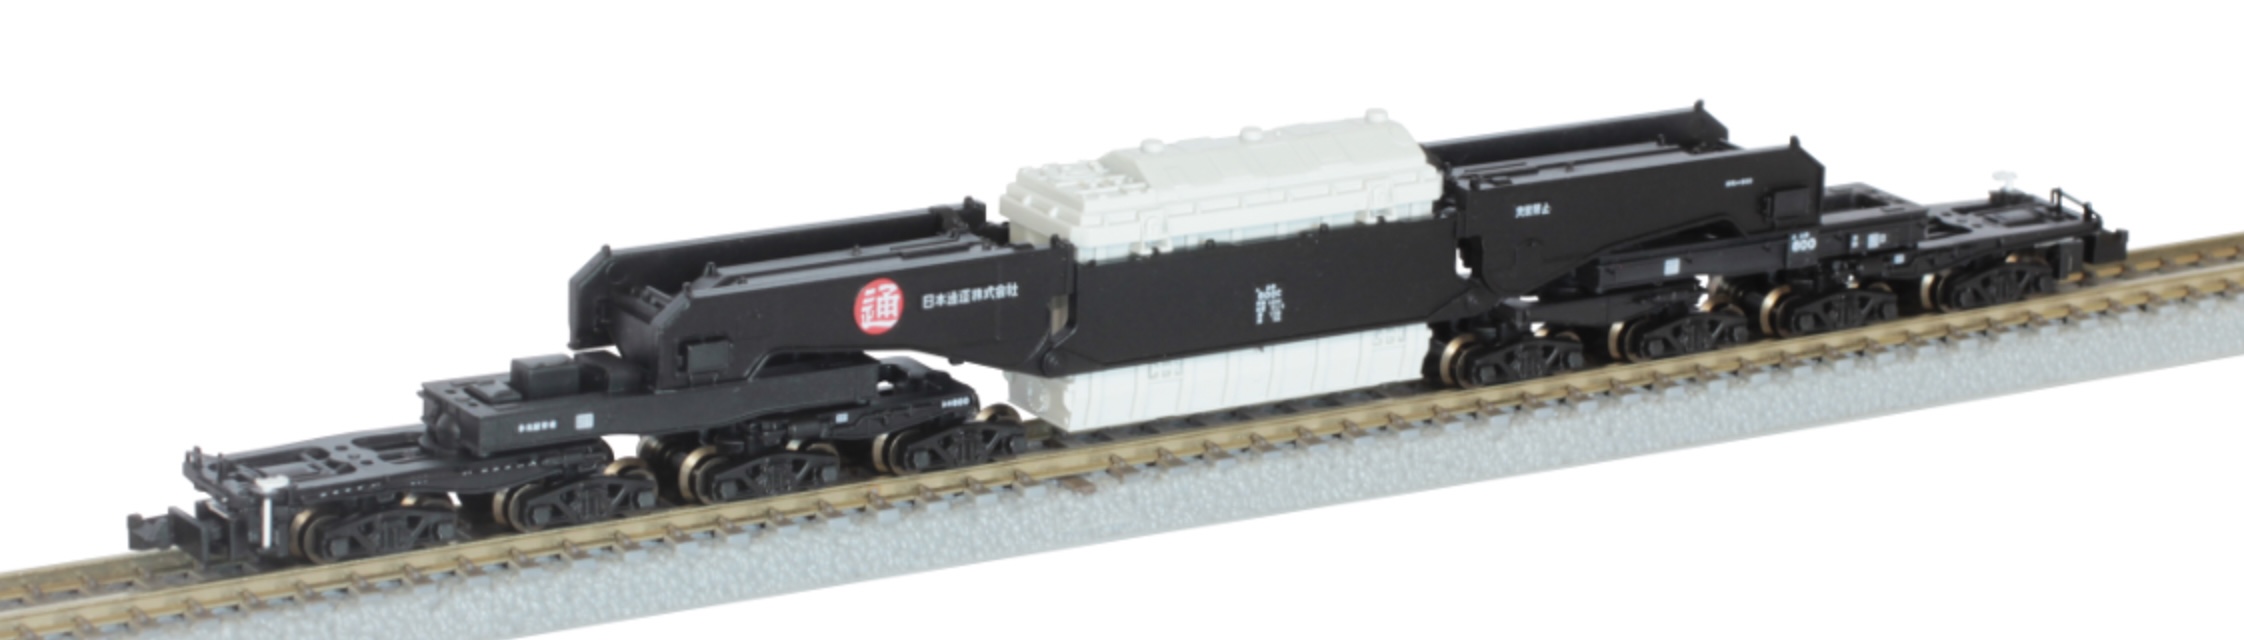 Z Scale - Rokuhan - T037-1 - Rolling Stock, Flatcar, SHIKI880, Transformer Transportation - Painted/Lettered